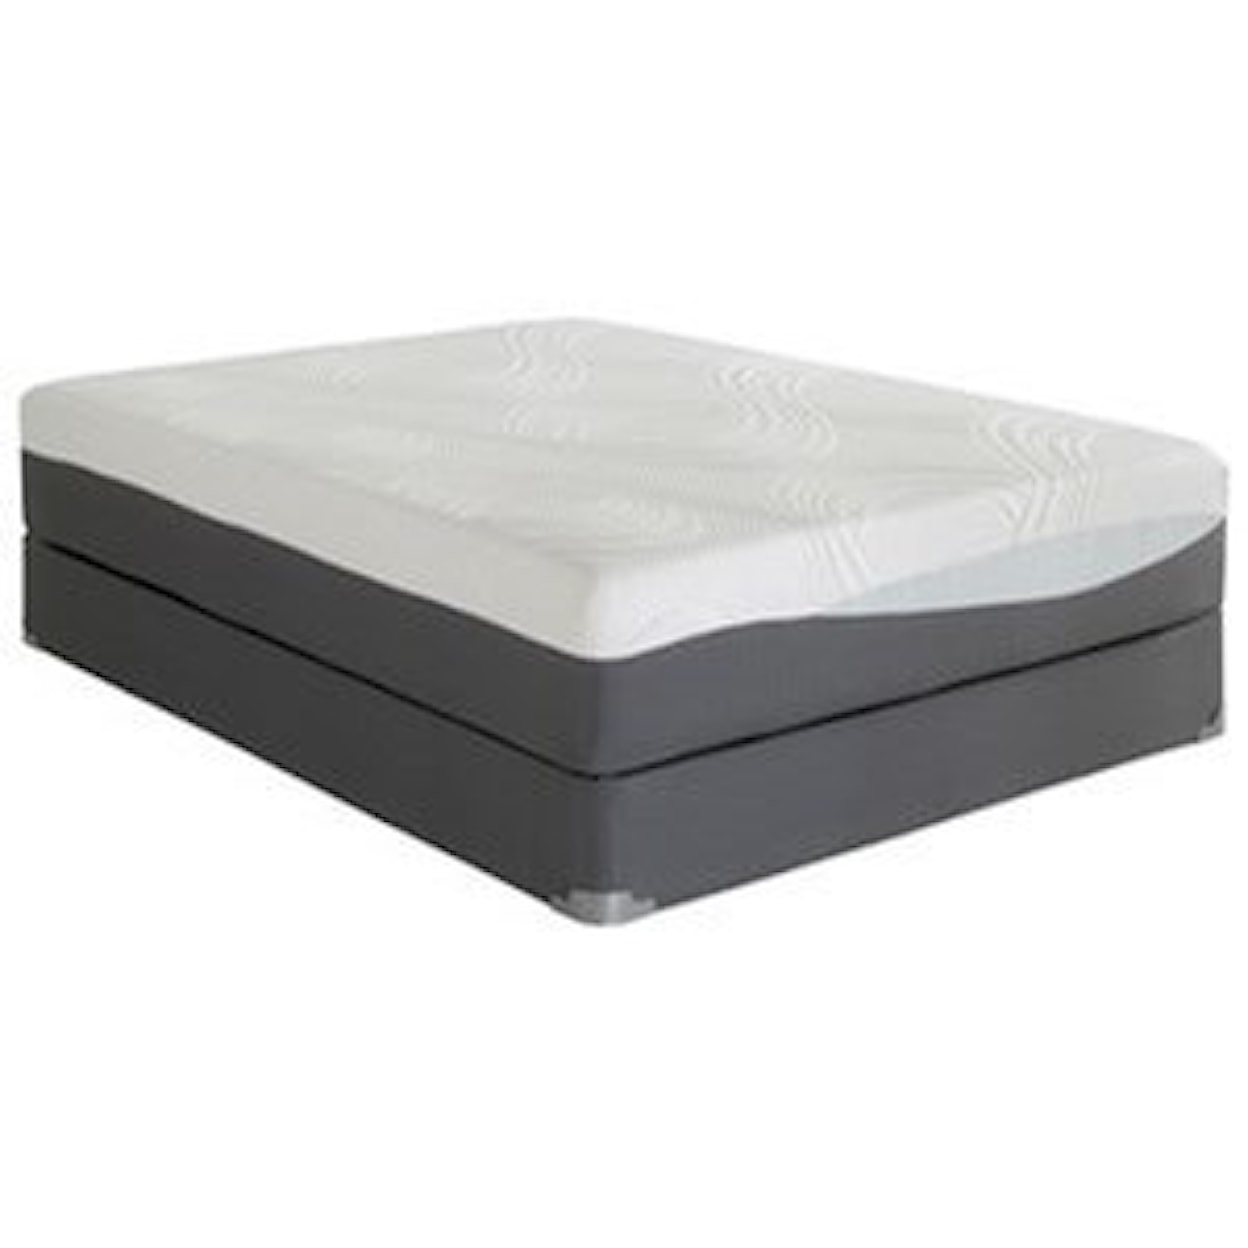 Spring Air Cool Reflections Phase IV Queen Luxury Plush 12" Gel Memory Foam Set